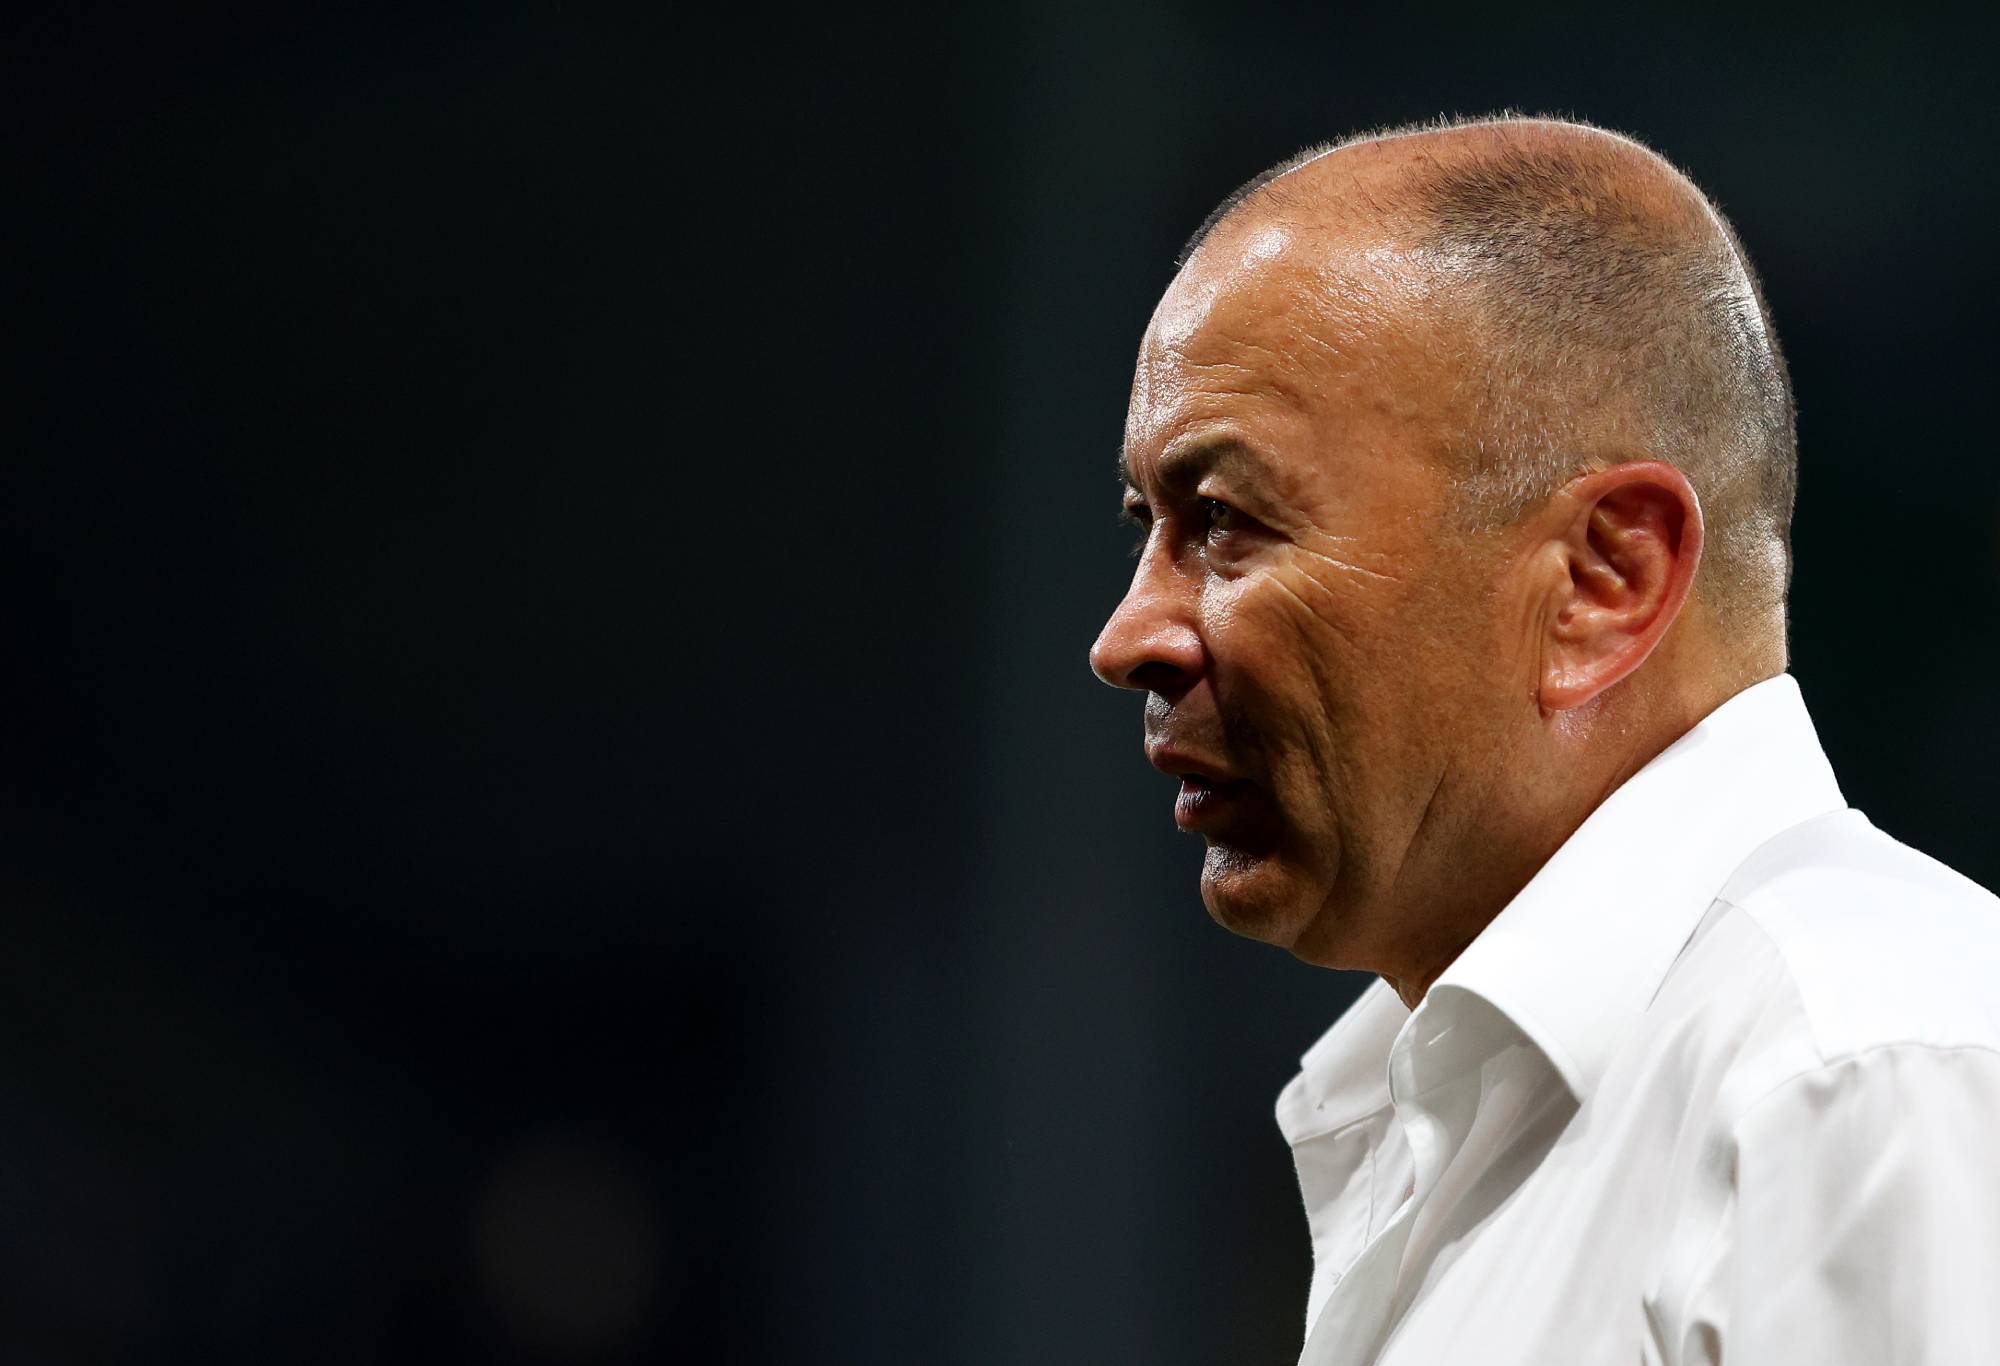 Eddie Jones, Head Coach of Australia, looks on at full-time following the Rugby World Cup France 2023 match between Australia and Fiji at Stade Geoffroy-Guichard on September 17, 2023 in Saint-Etienne, France. (Photo by Chris Hyde/Getty Images)